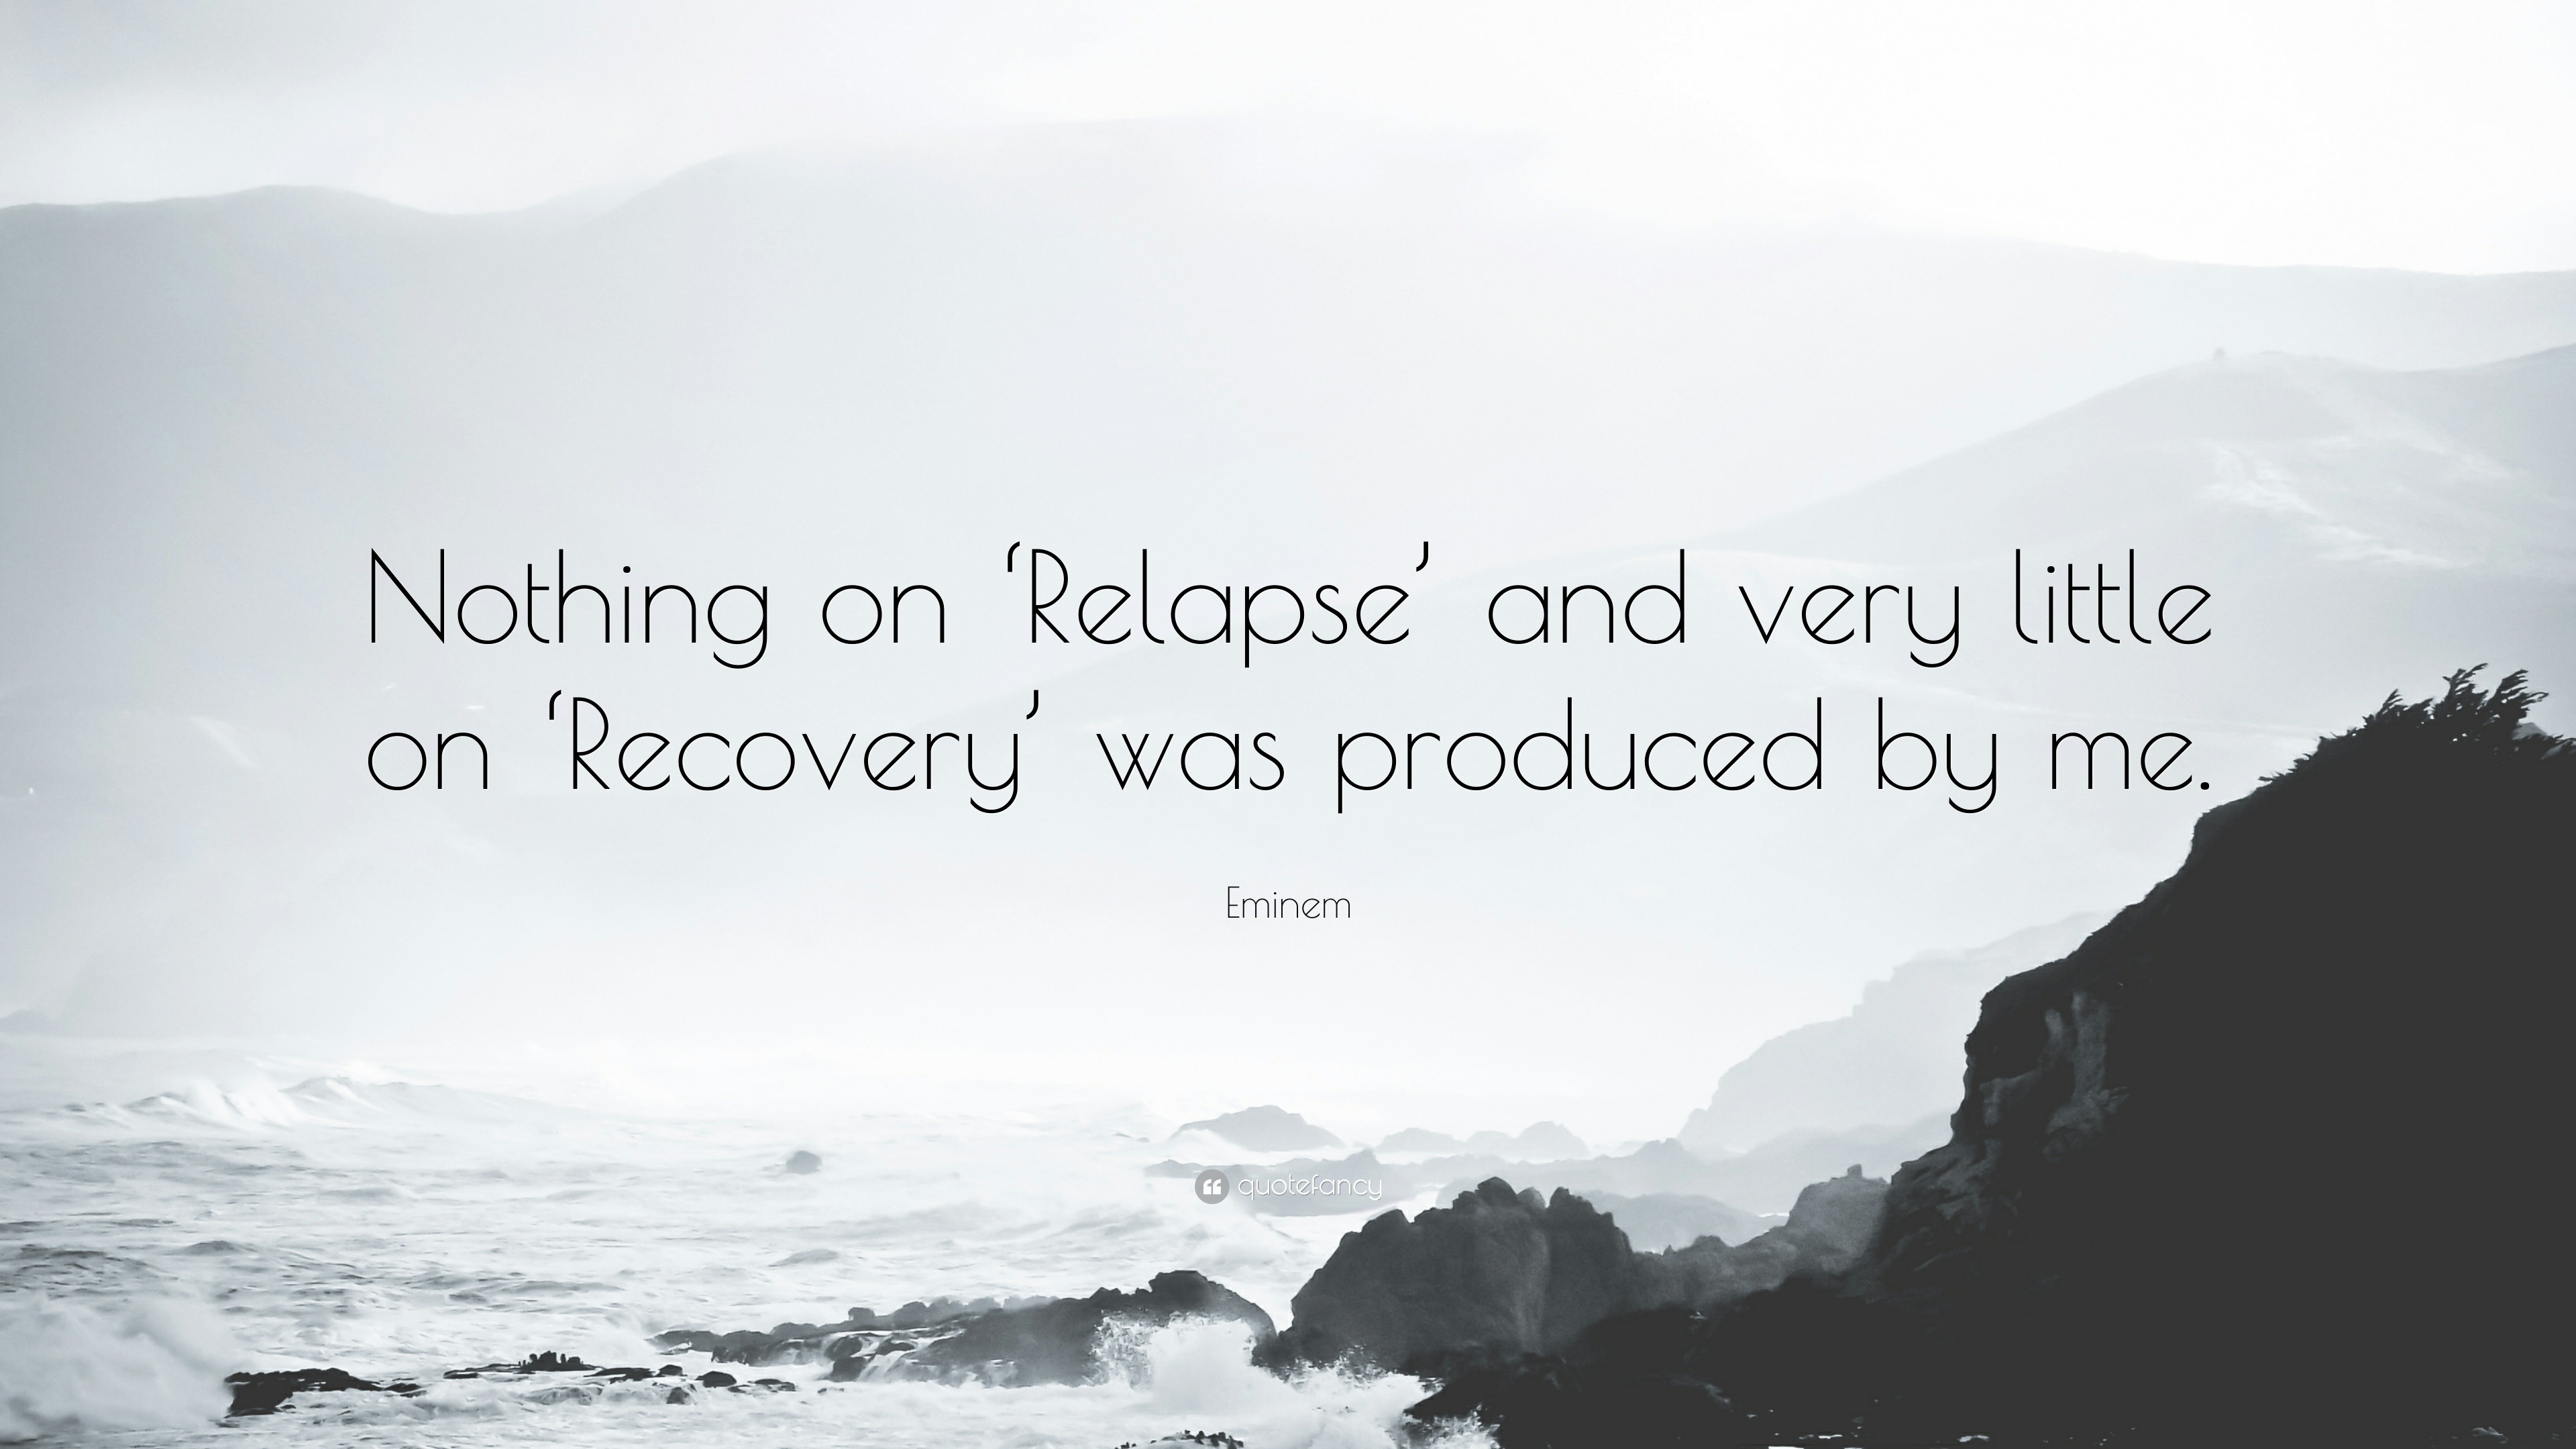 https://quotefancy.com/media/wallpaper/3840x2160/620961-Eminem-Quote-Nothing-on-Relapse-and-very-little-on-Recovery-was.jpg